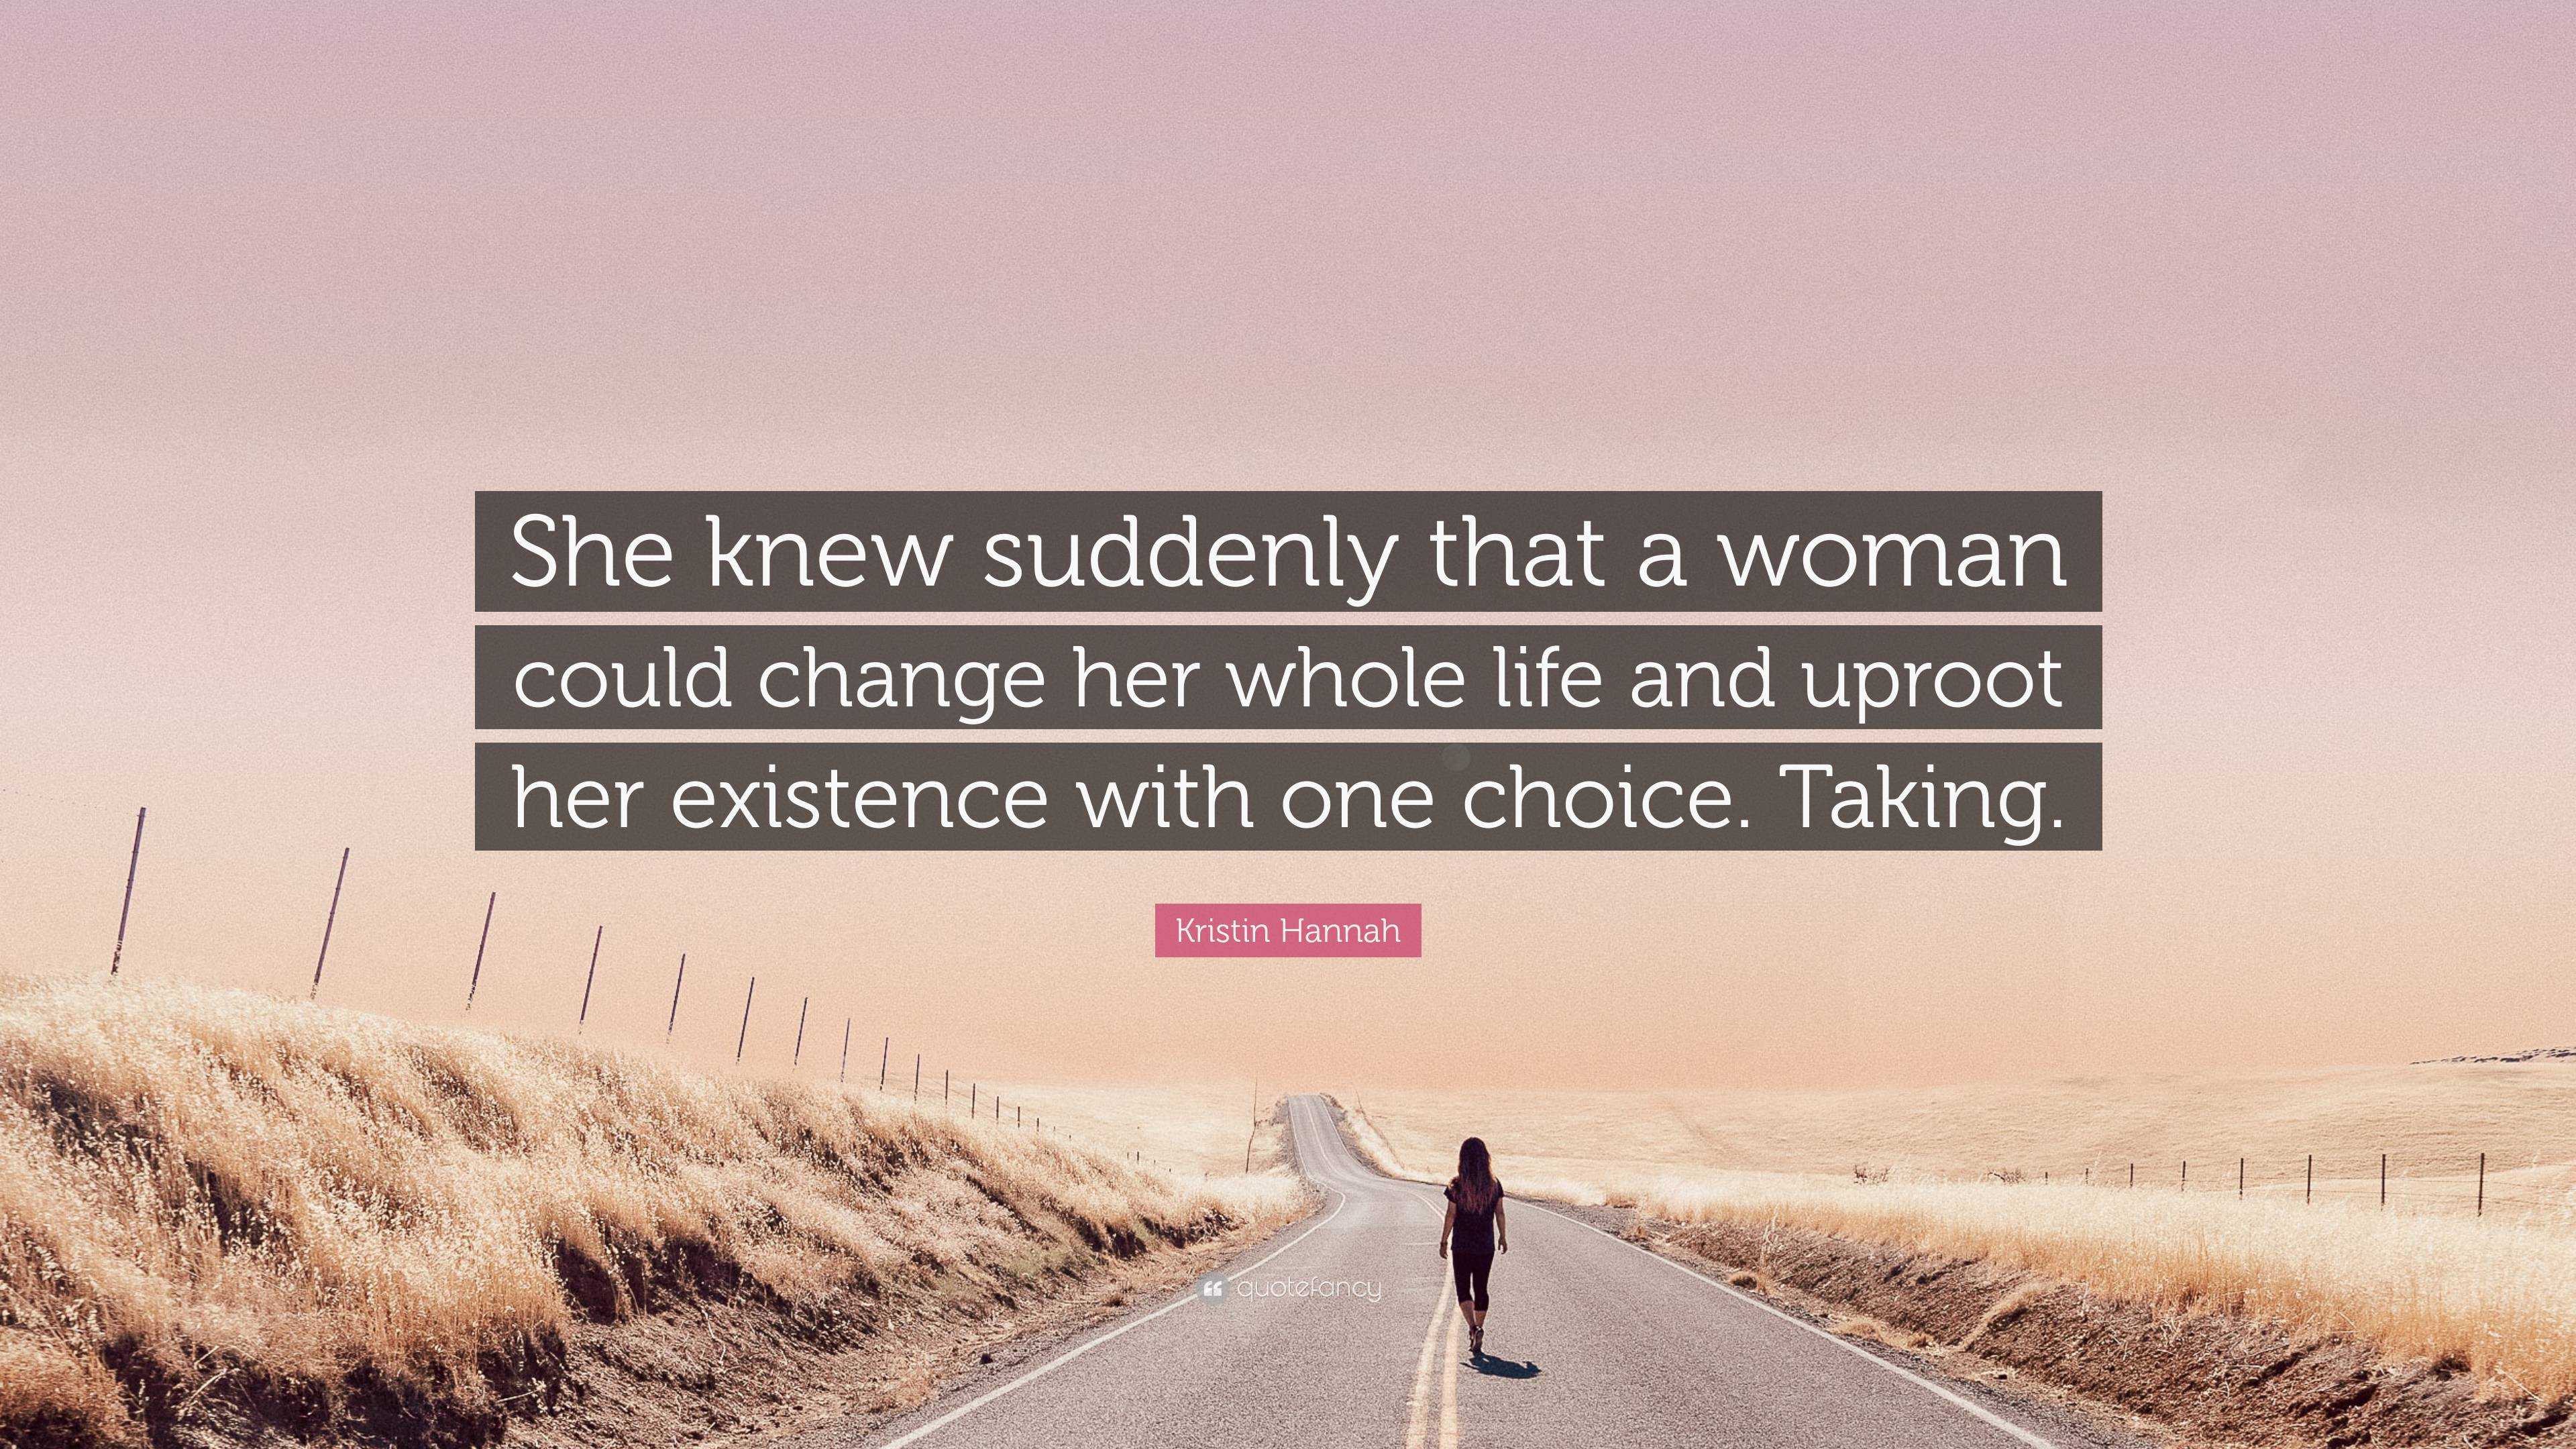 Kristin Hannah Quote: “She knew suddenly that a woman could change her ...